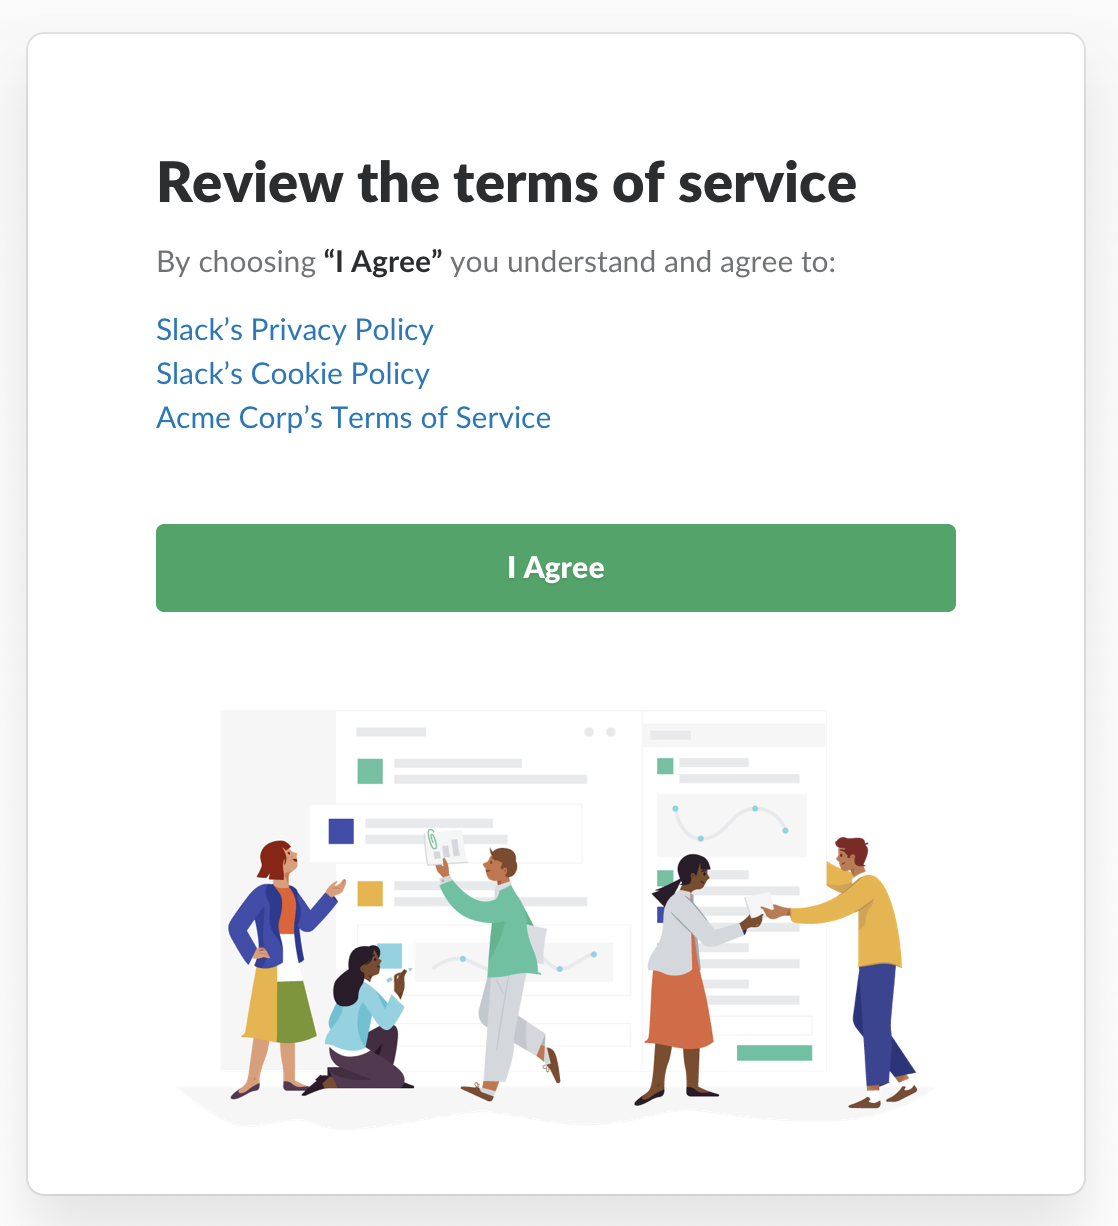 Prompt to review the terms of service for Slack and the Enterprise Grid organisation